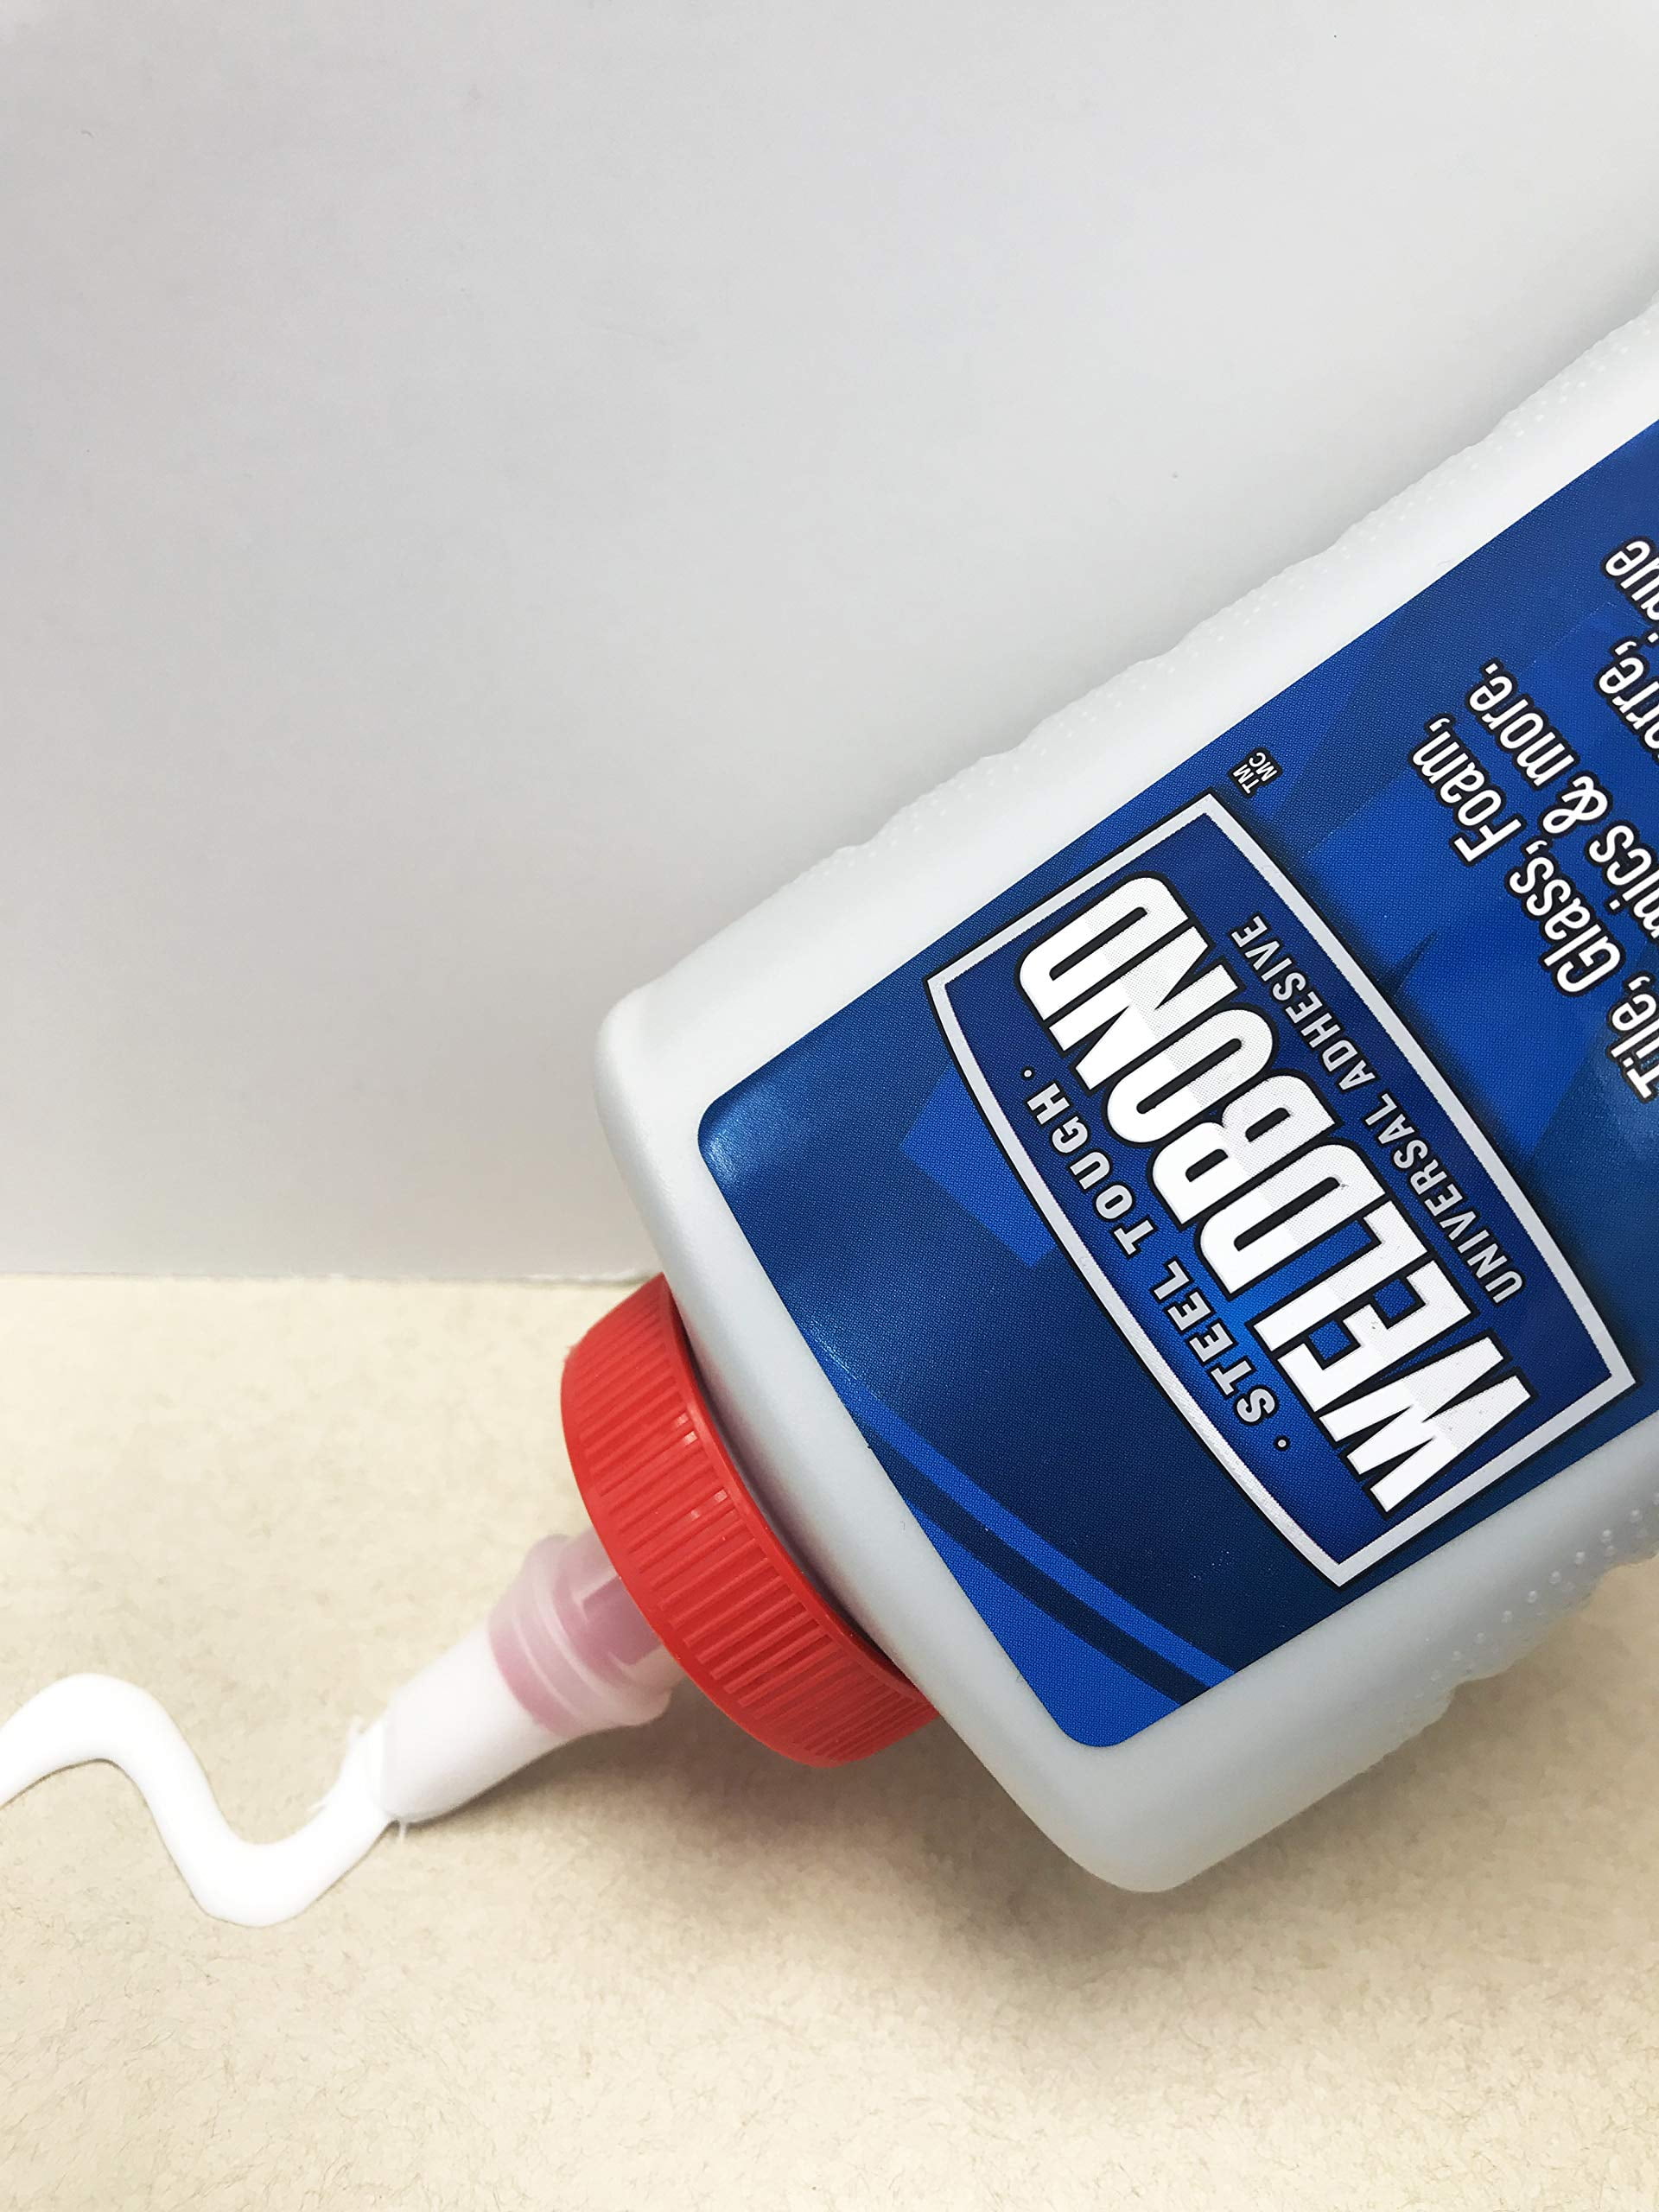  Weldbond Glue - Bonds Most Anything! 3L /101 oz Non-Toxic  Adhesive Glue For Wood Tile Glass Craft Foam Fabric Stone Cement & Concrete  & Any Other Porous Surfaces. No Fume Non-Flammable